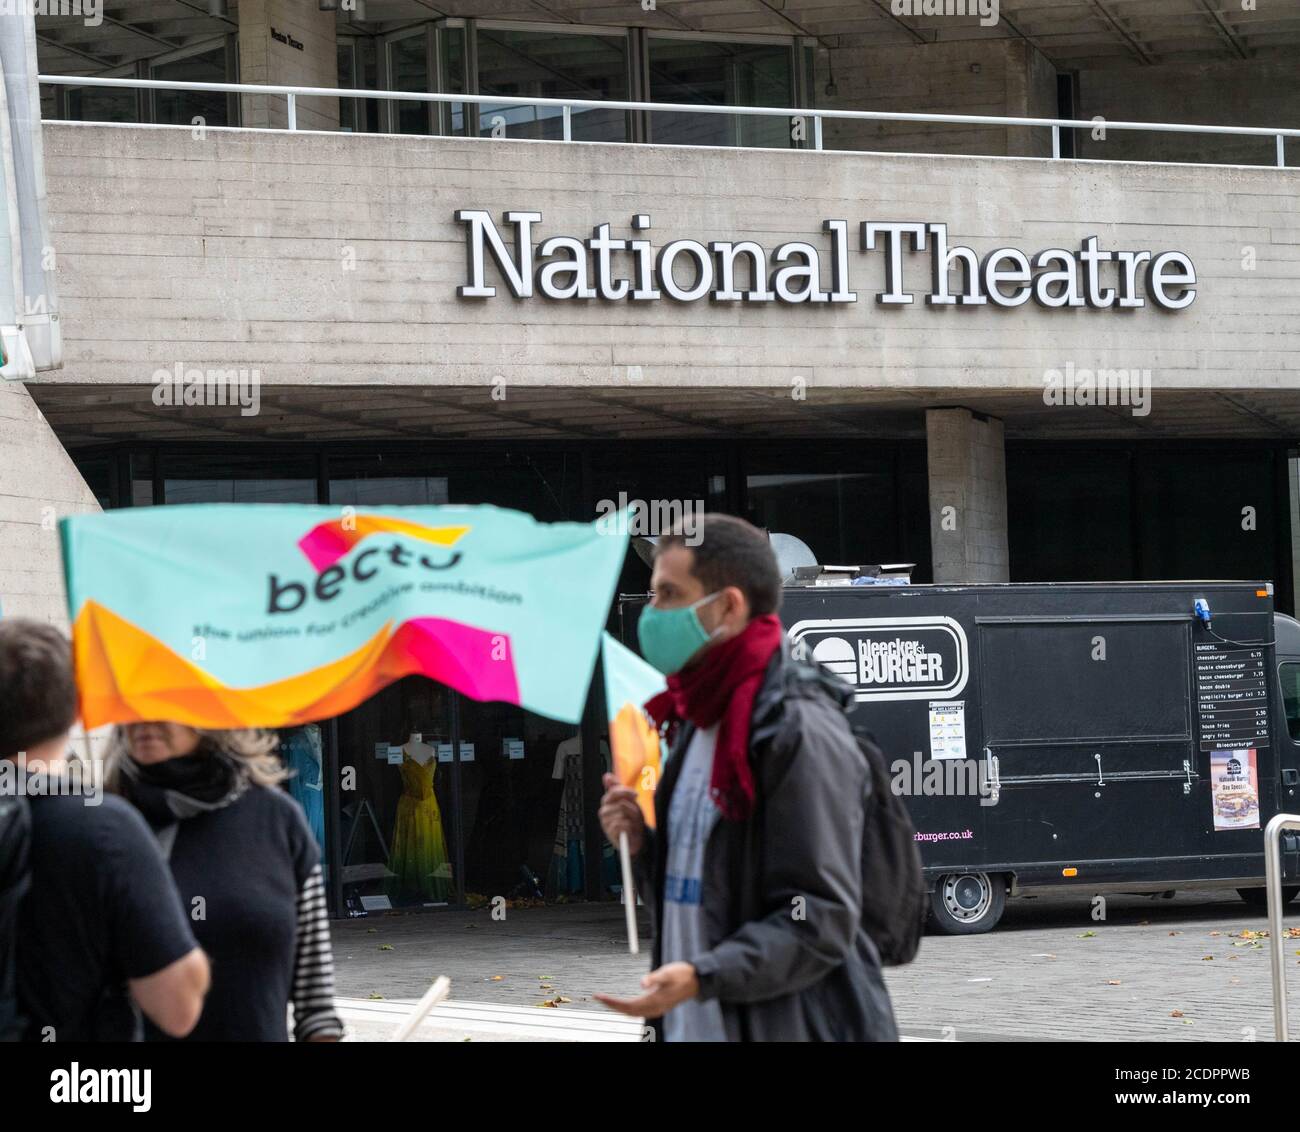 London 29th August 2020 Trade Union protest against redundancies in the arts held outside the National Theatre Credit: Ian Davidson/Alamy Live News Stock Photo